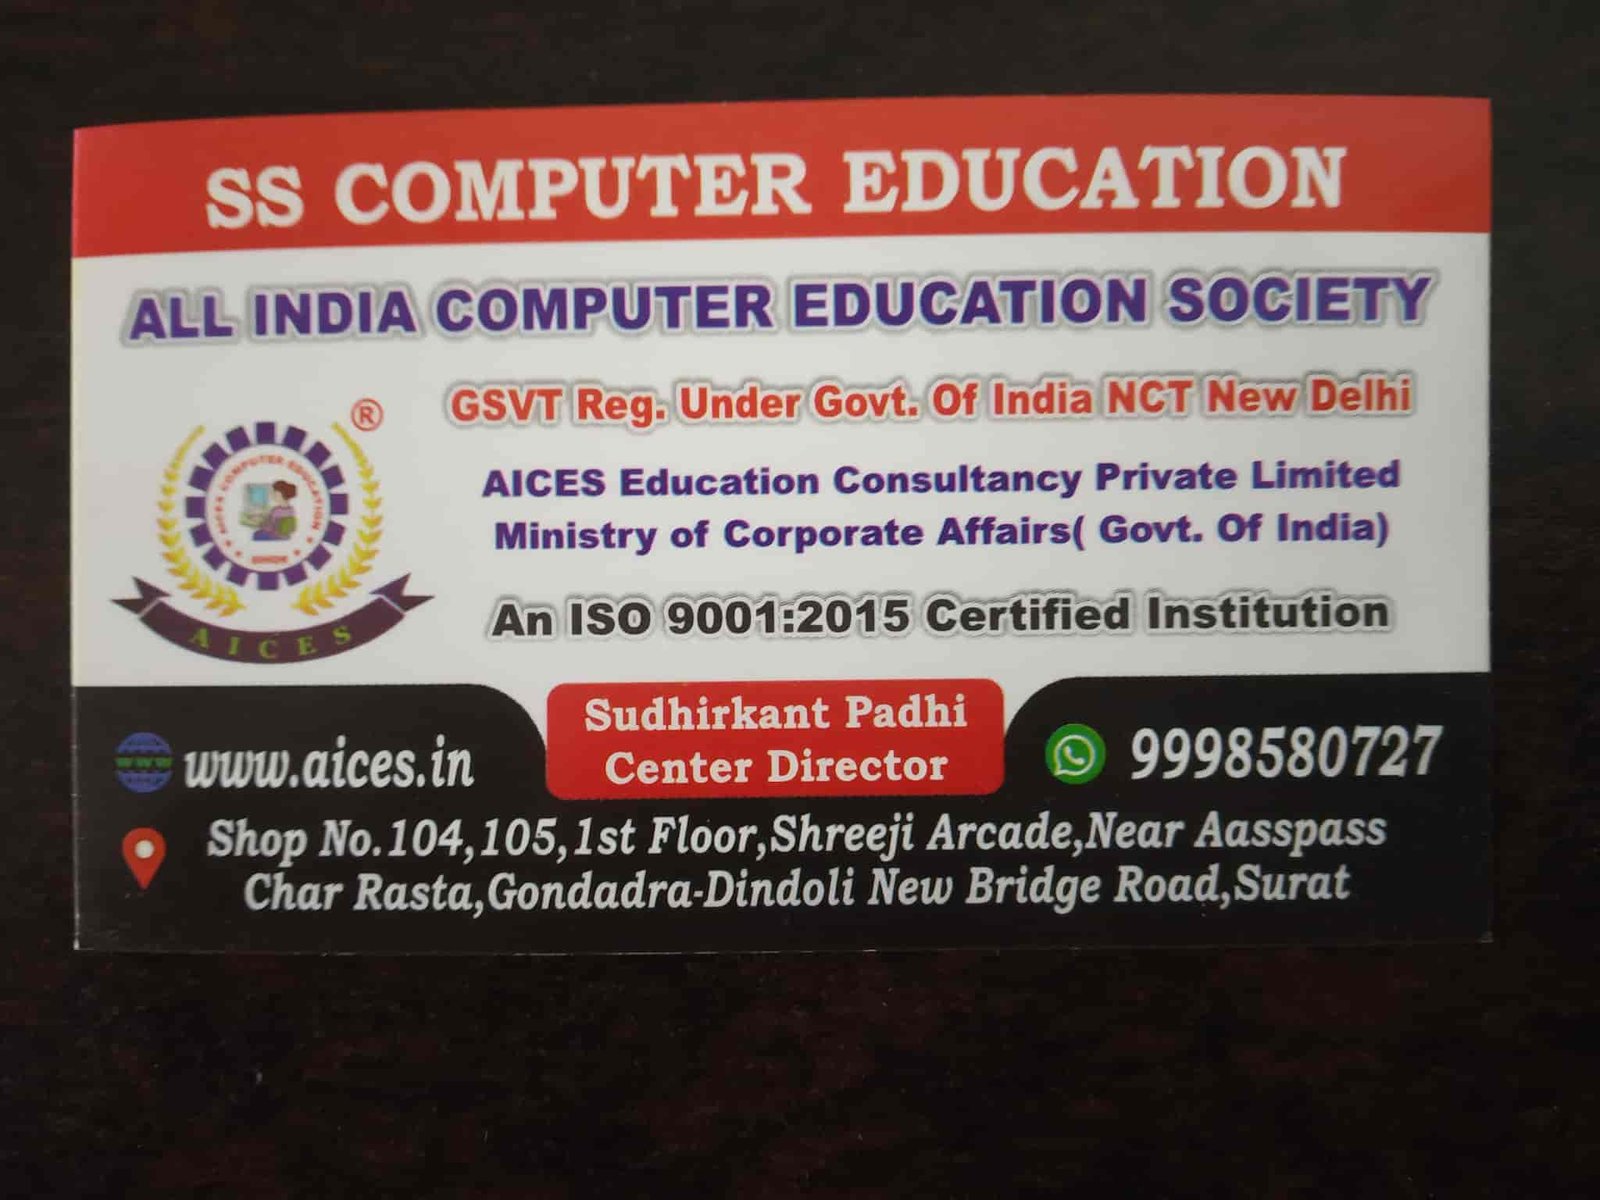 SS Computer Education